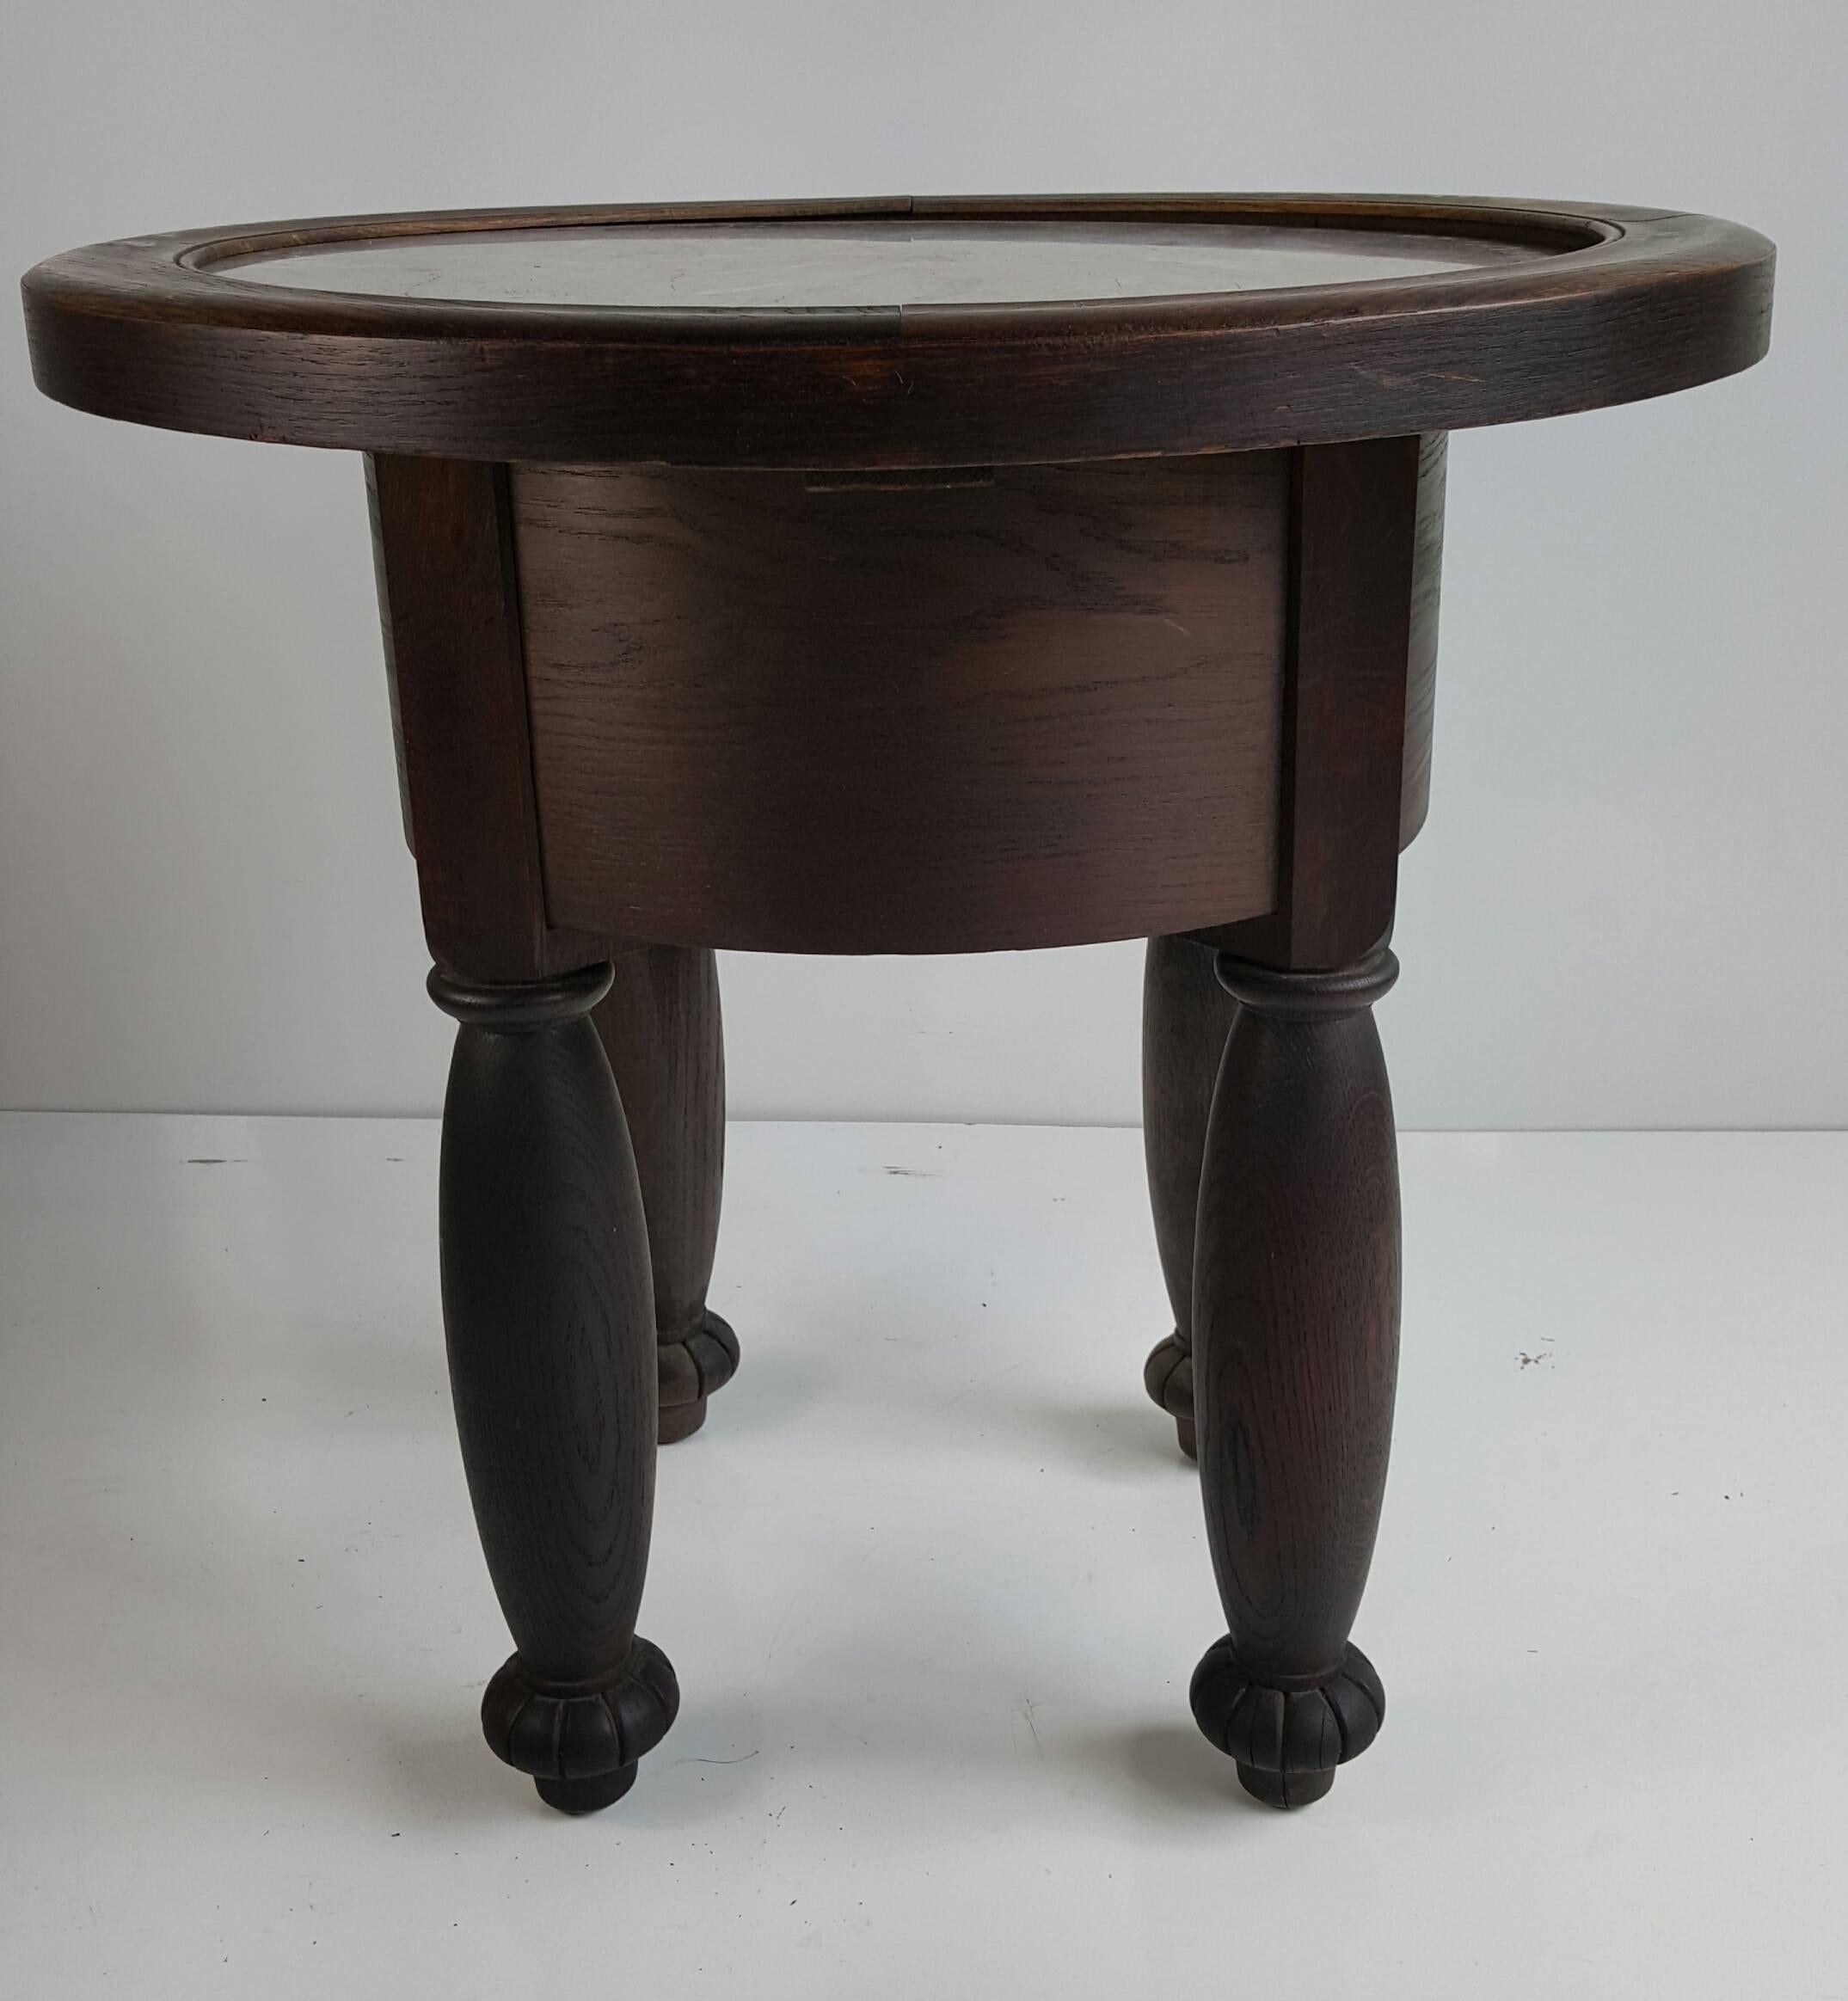 Unusual French of German Art Deco table, wonderful patina, great scale, proportion. Retains original marble-top, veined grays, pinks, blacks and browns.